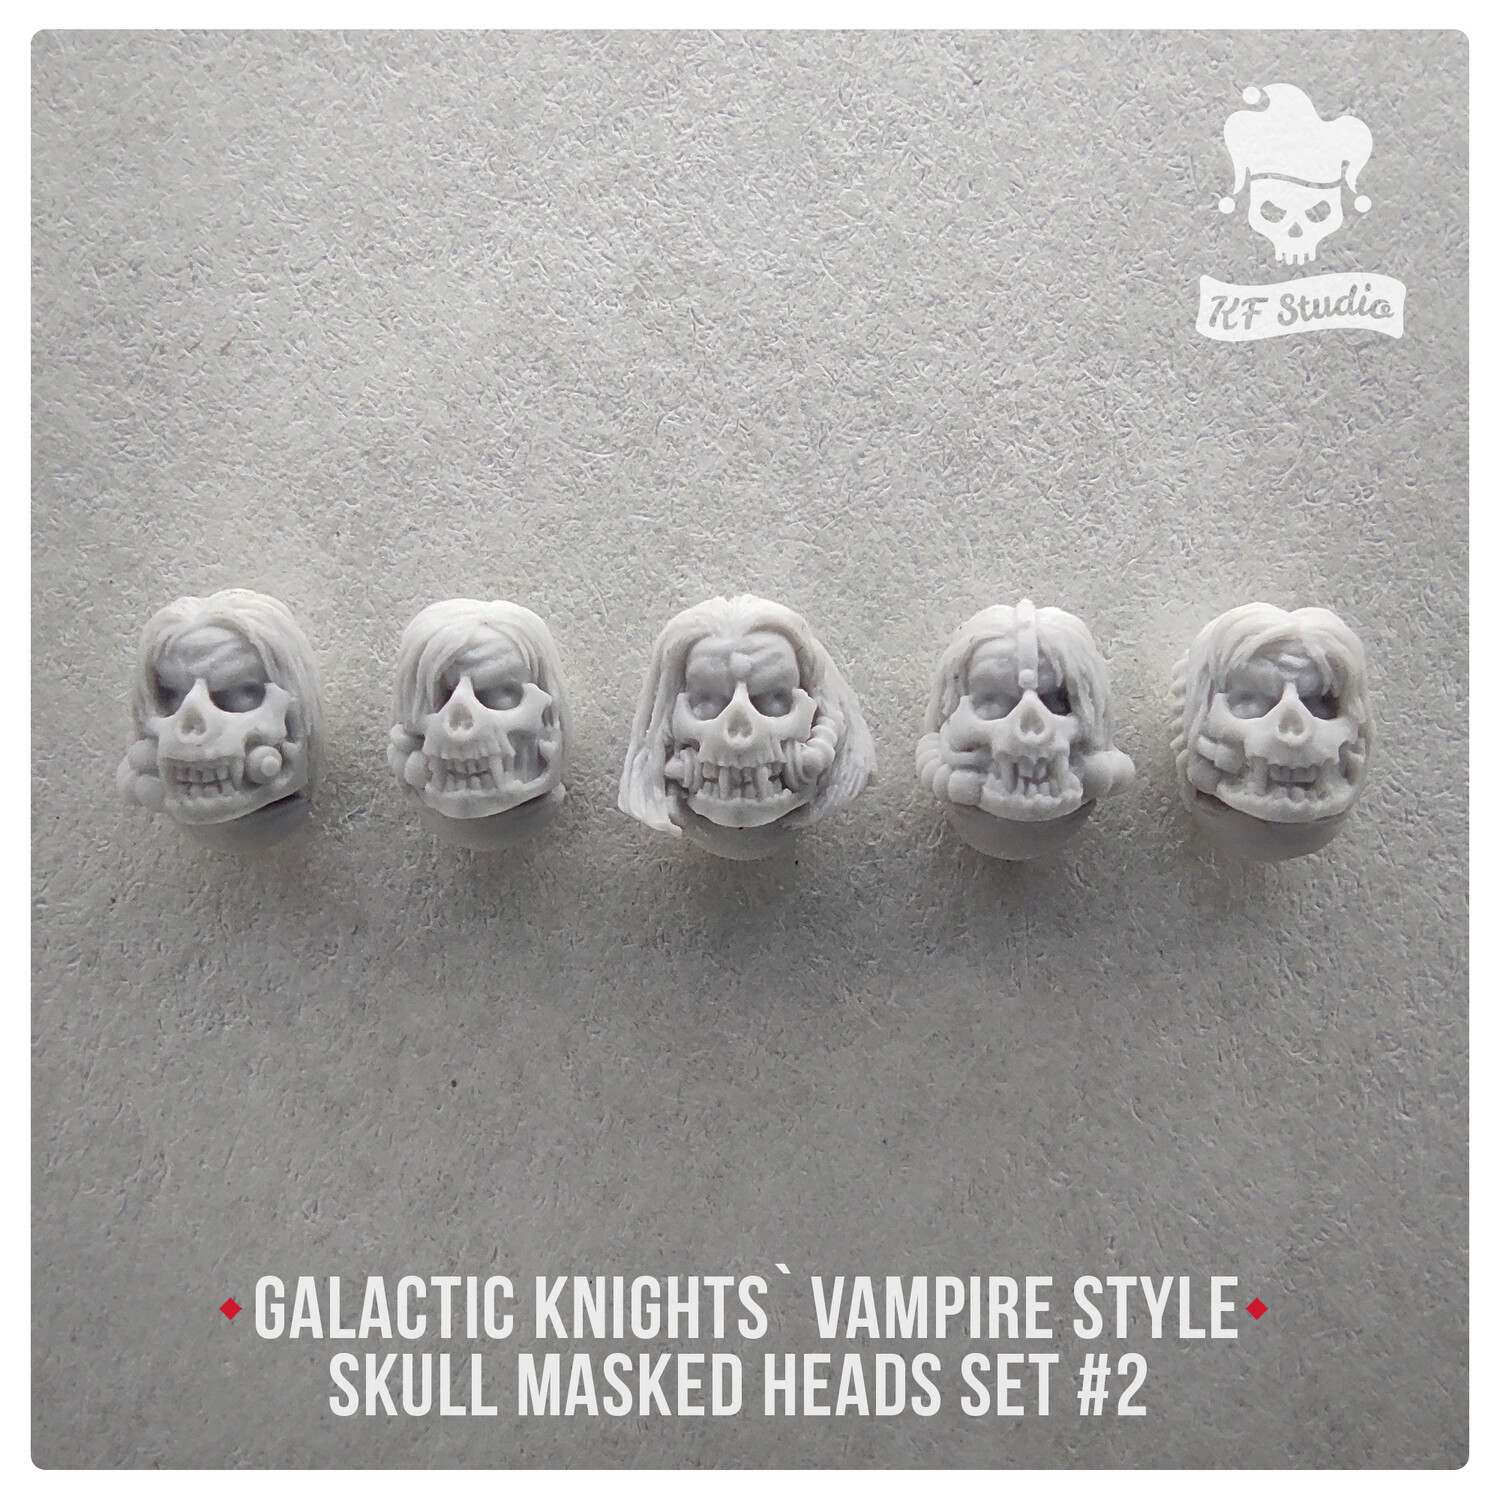 Vampire Style Galactic Knights skull masked heads set#2 by KFStudio